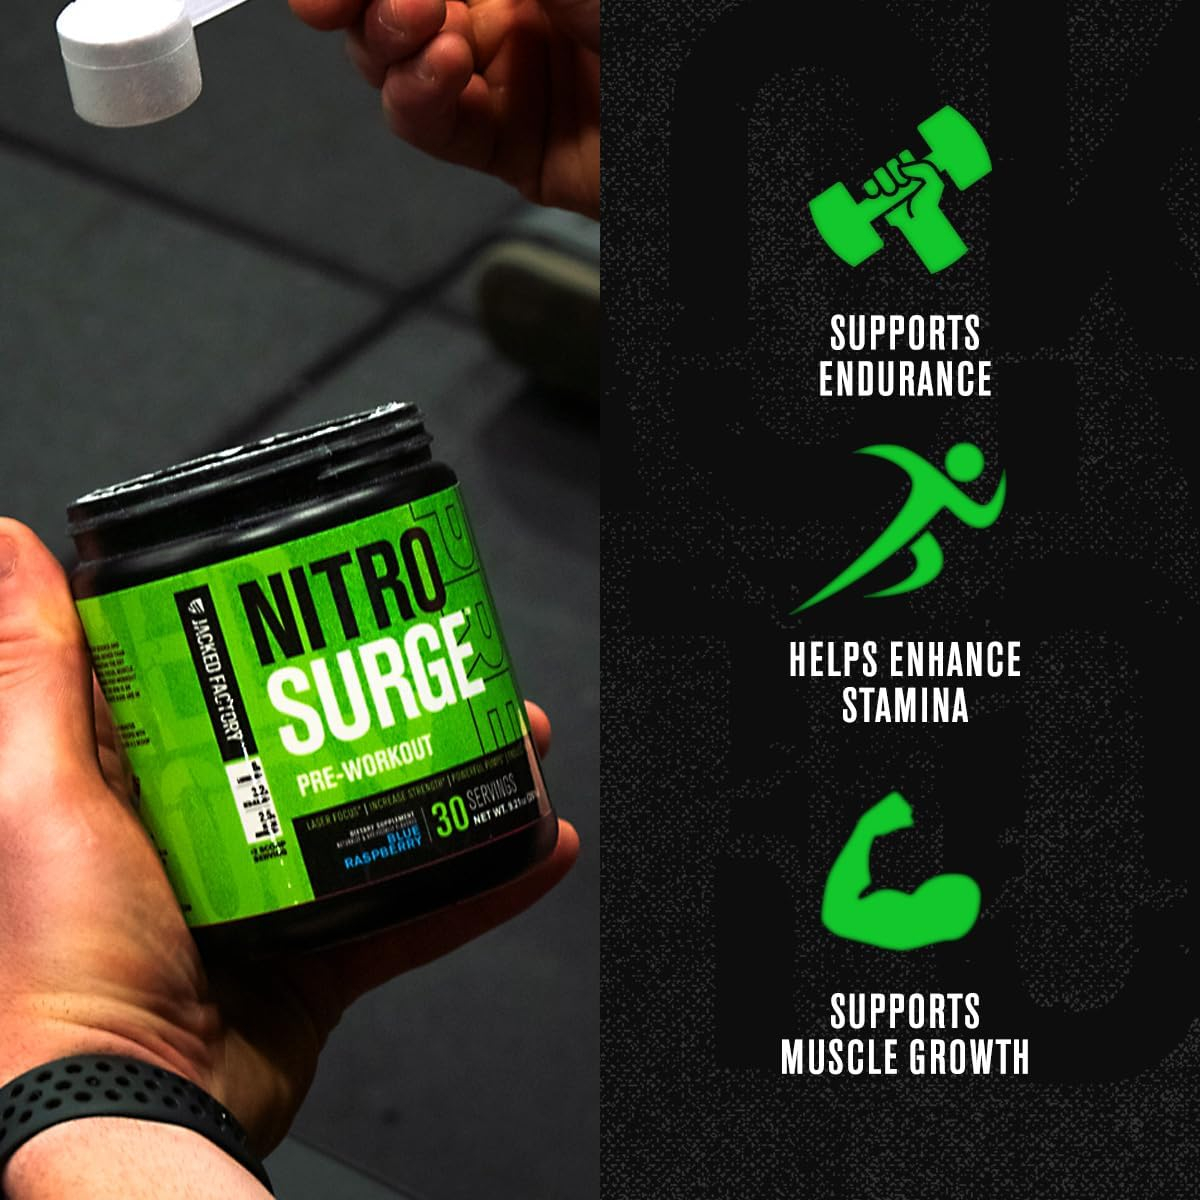 NITROSURGE Pre Workout Supplement - Endless Energy, Instant Strength Gains, Clear Focus, Intense Pumps - Nitric Oxide Booster  Preworkout Powder with Beta Alanine - 30 Servings, Pineapple